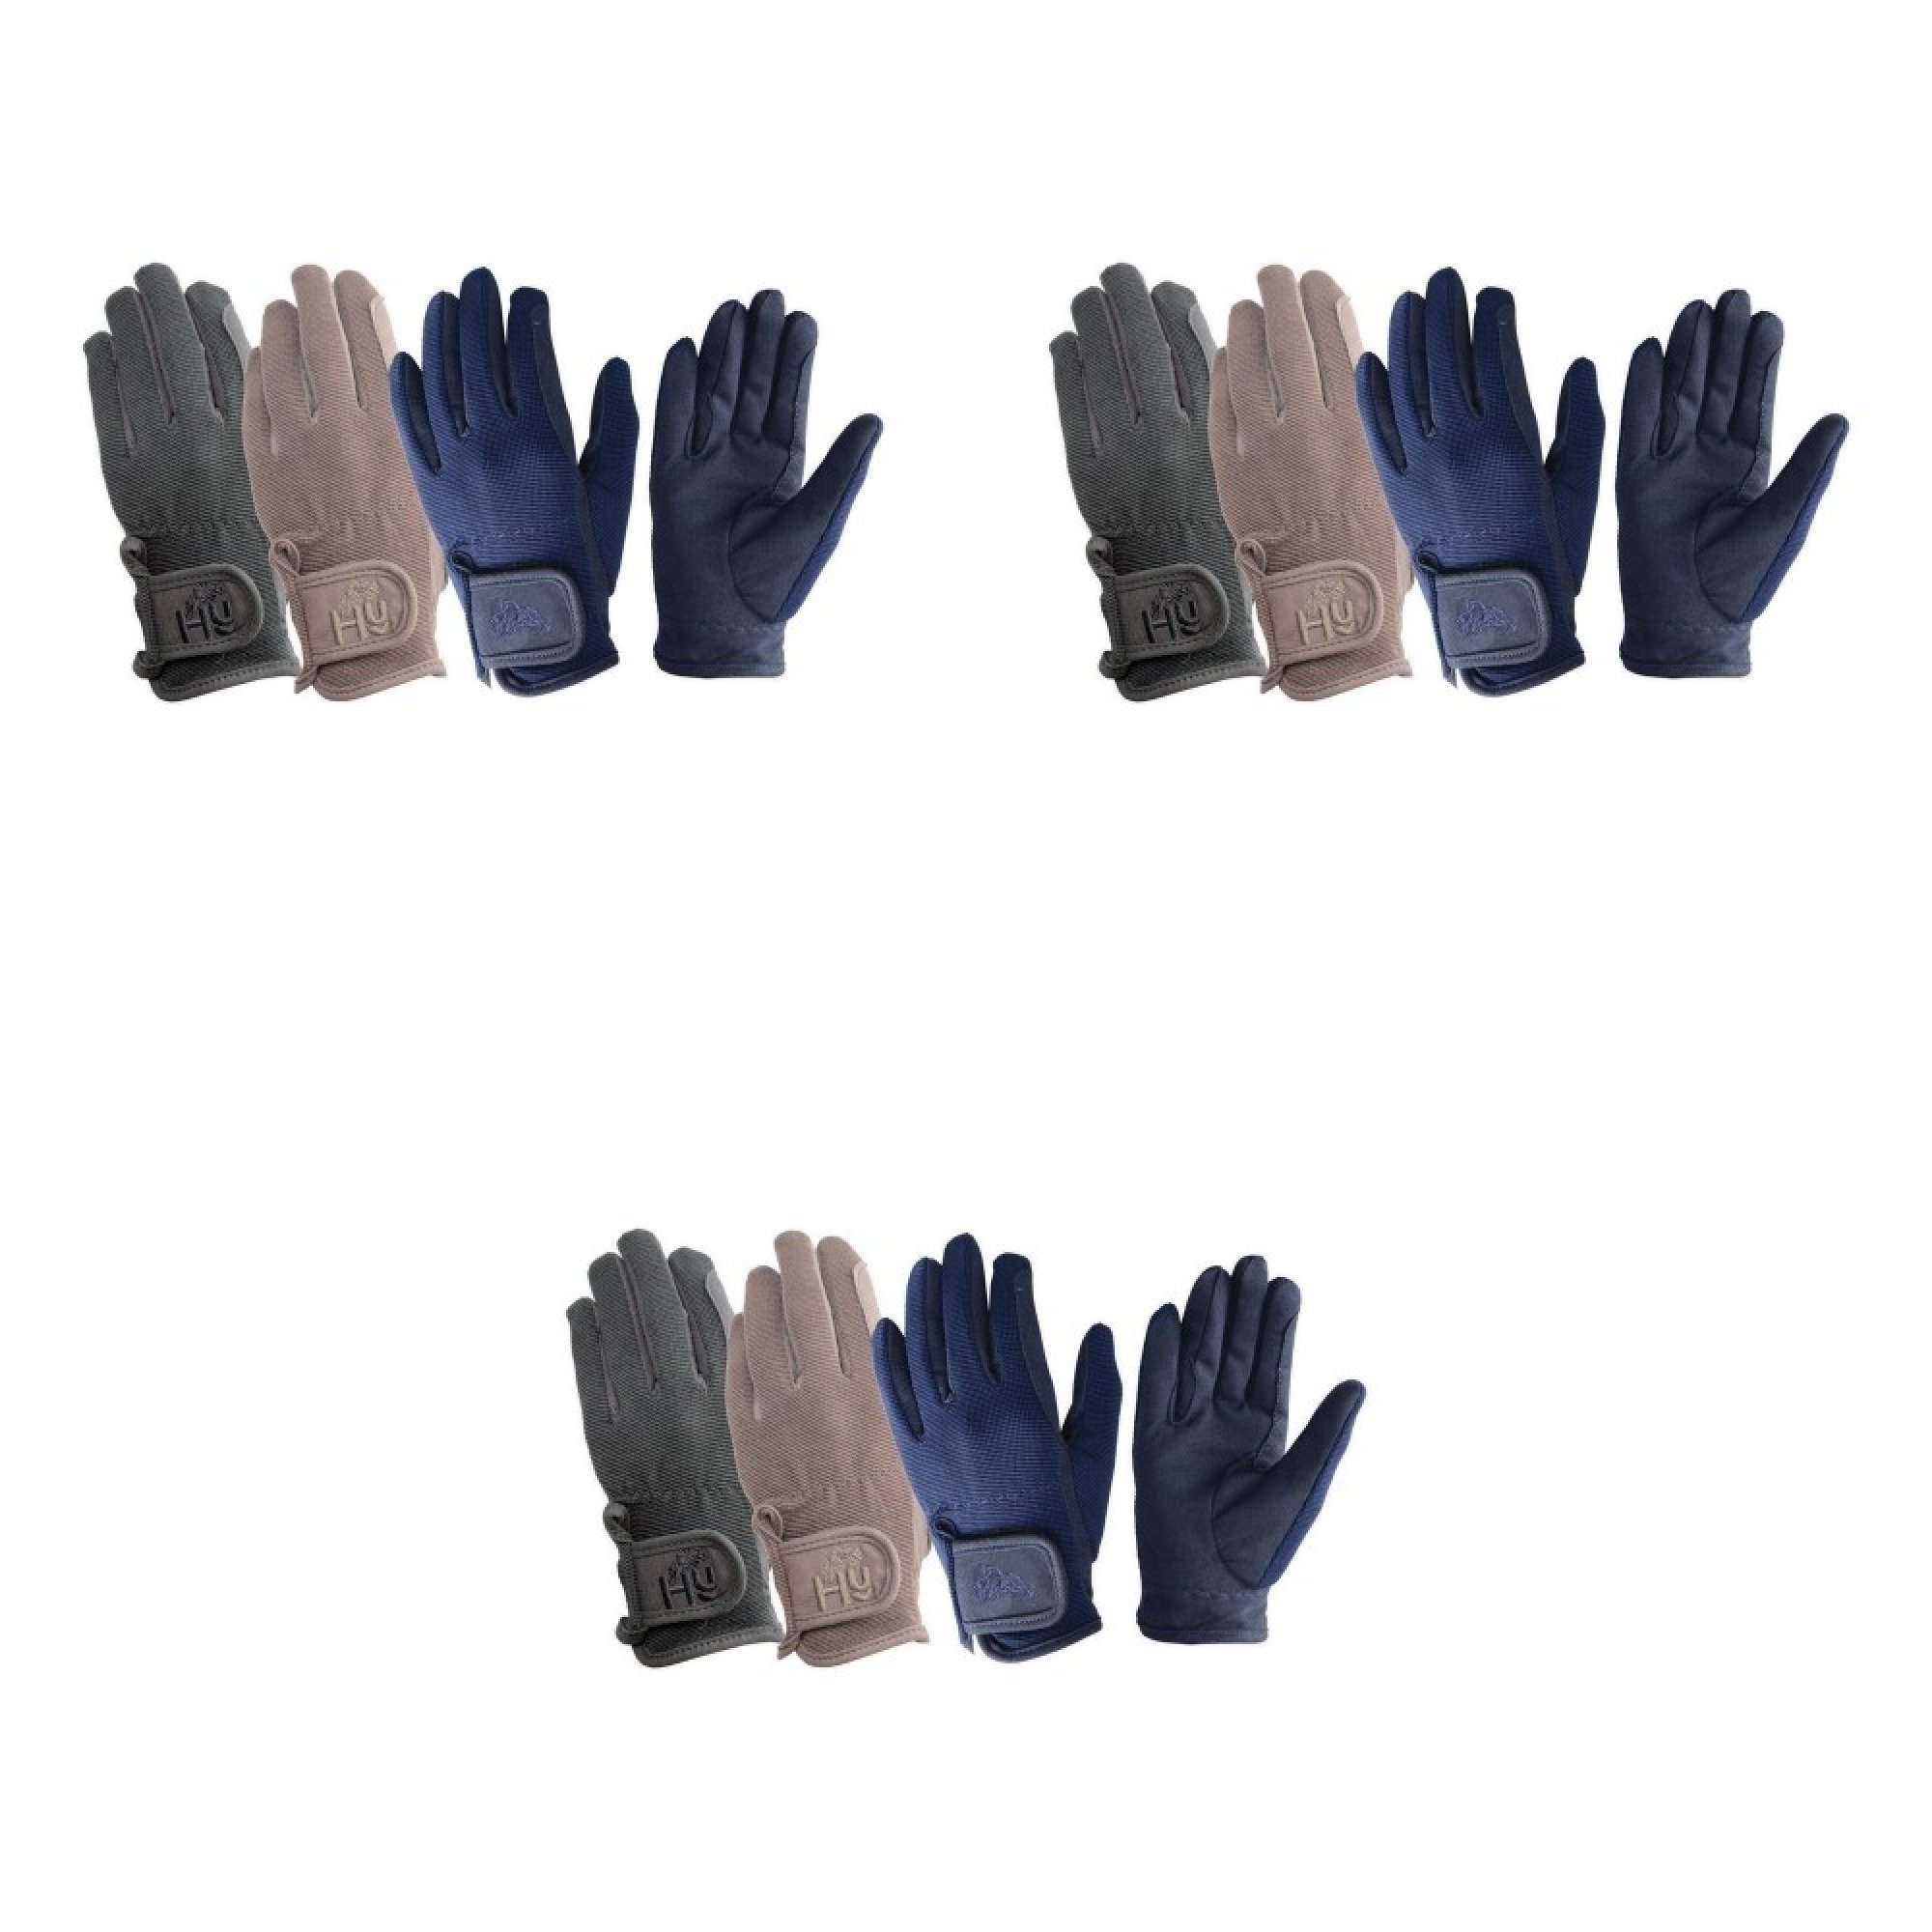 Hy5 Children/Kids Every Day Riding Gloves